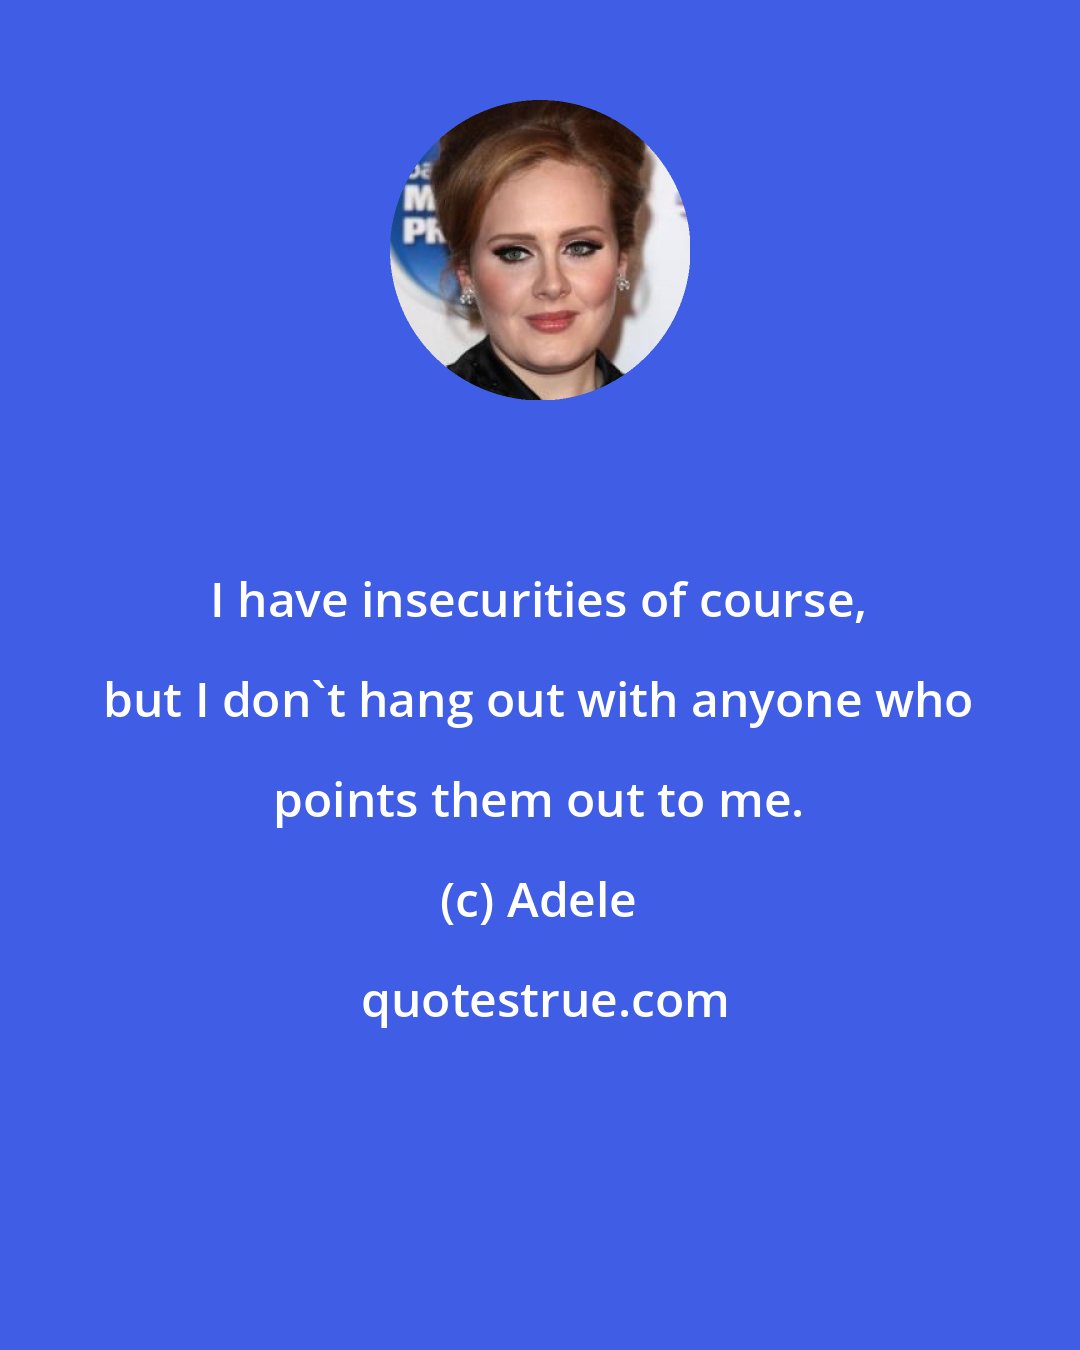 Adele: I have insecurities of course, but I don't hang out with anyone who points them out to me.